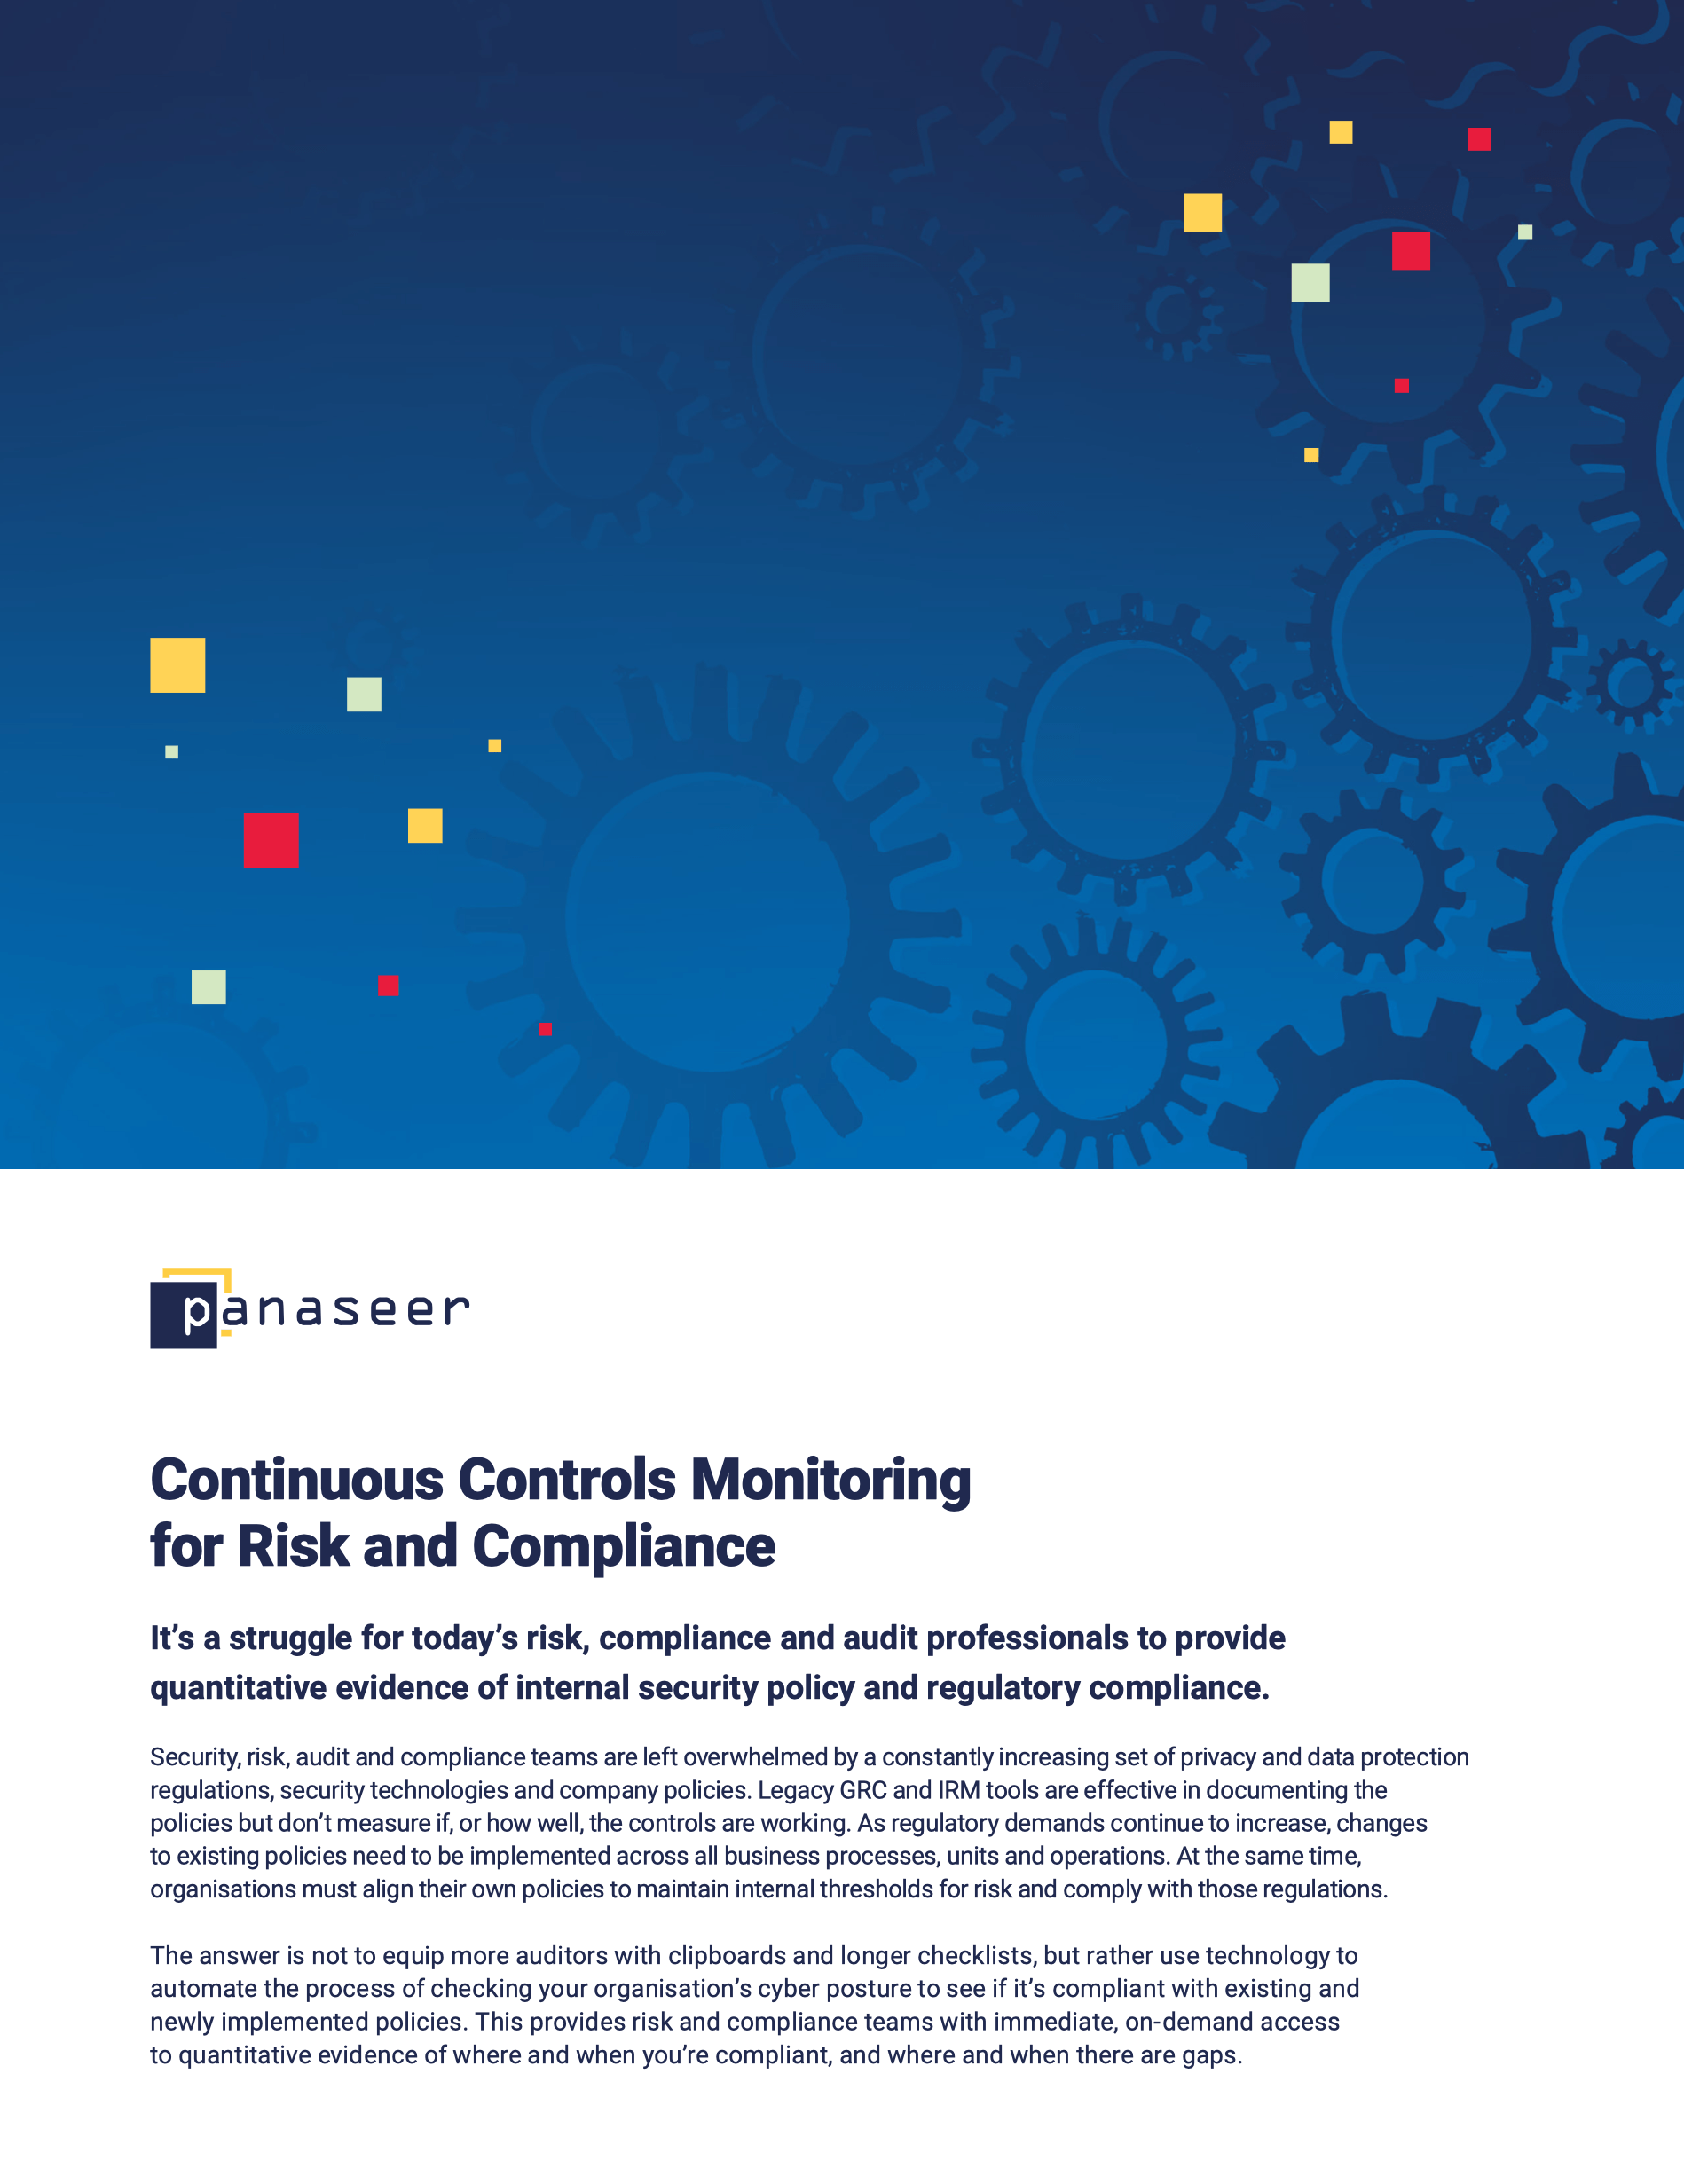 Overview: Continuous Controls Monitoring for Risk and Compliance